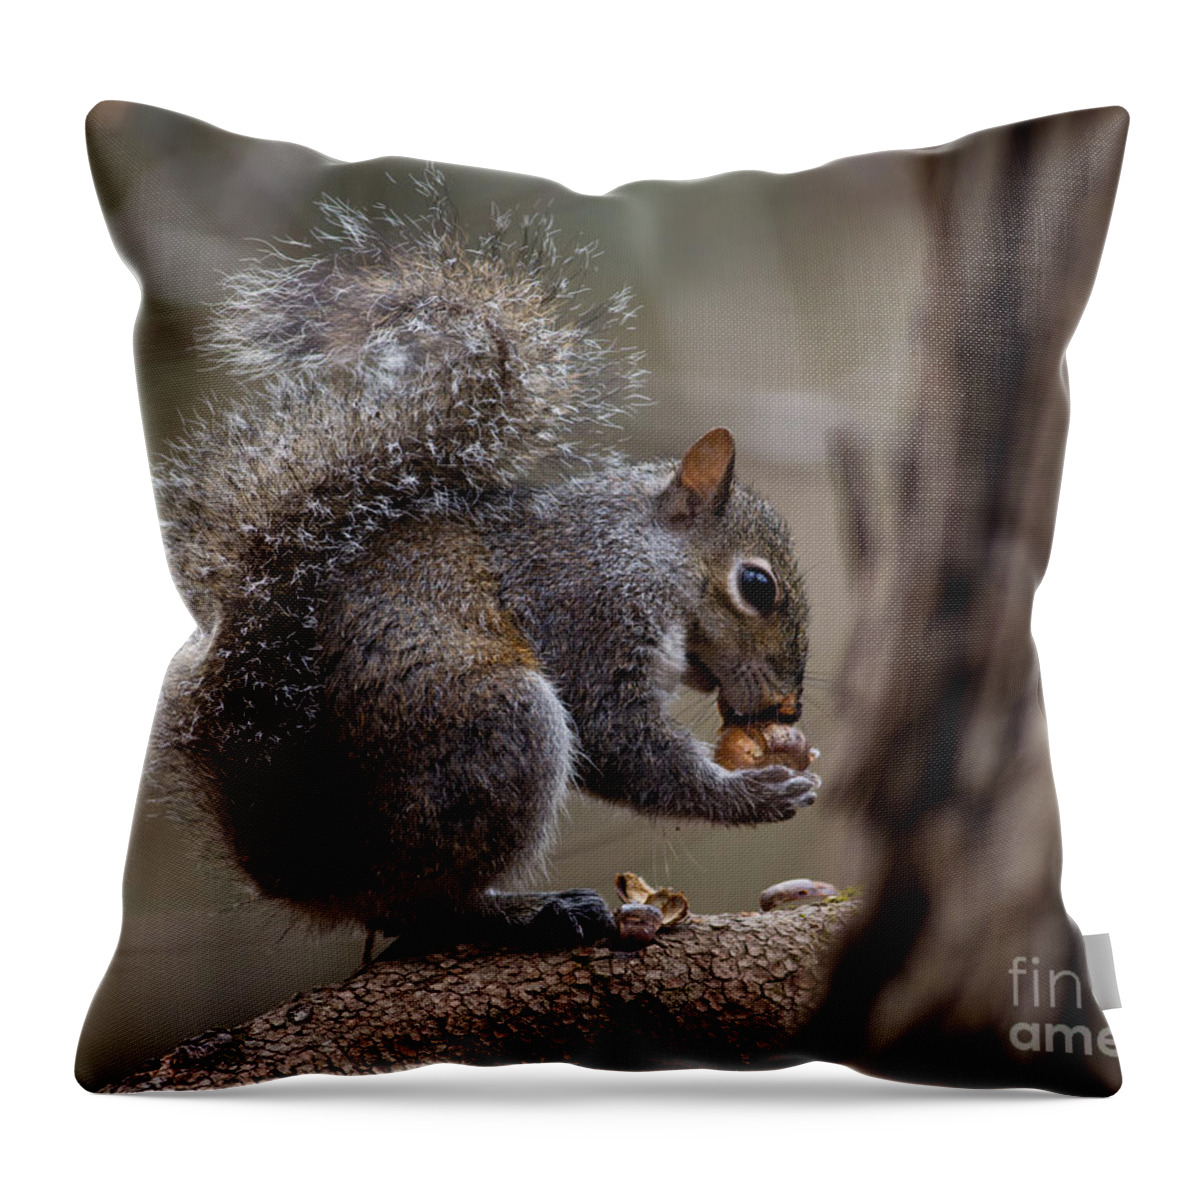  Throw Pillow featuring the photograph Squirrel II by Douglas Stucky